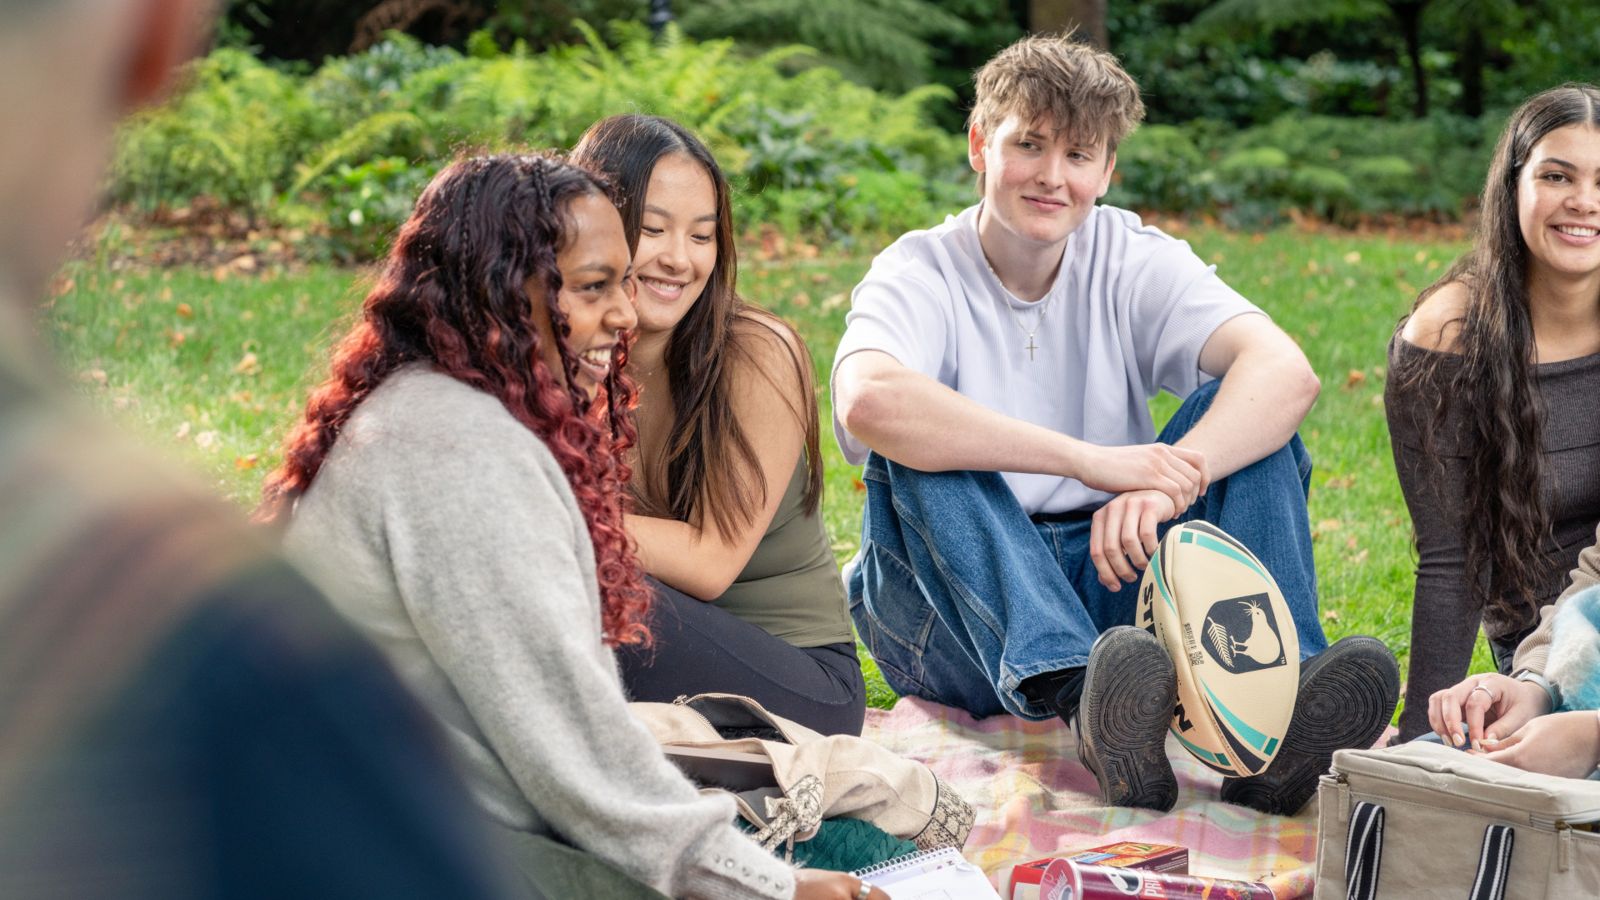 Young people sitting on a picnic mat in the gardens and talking together, one is holding a rugby ball